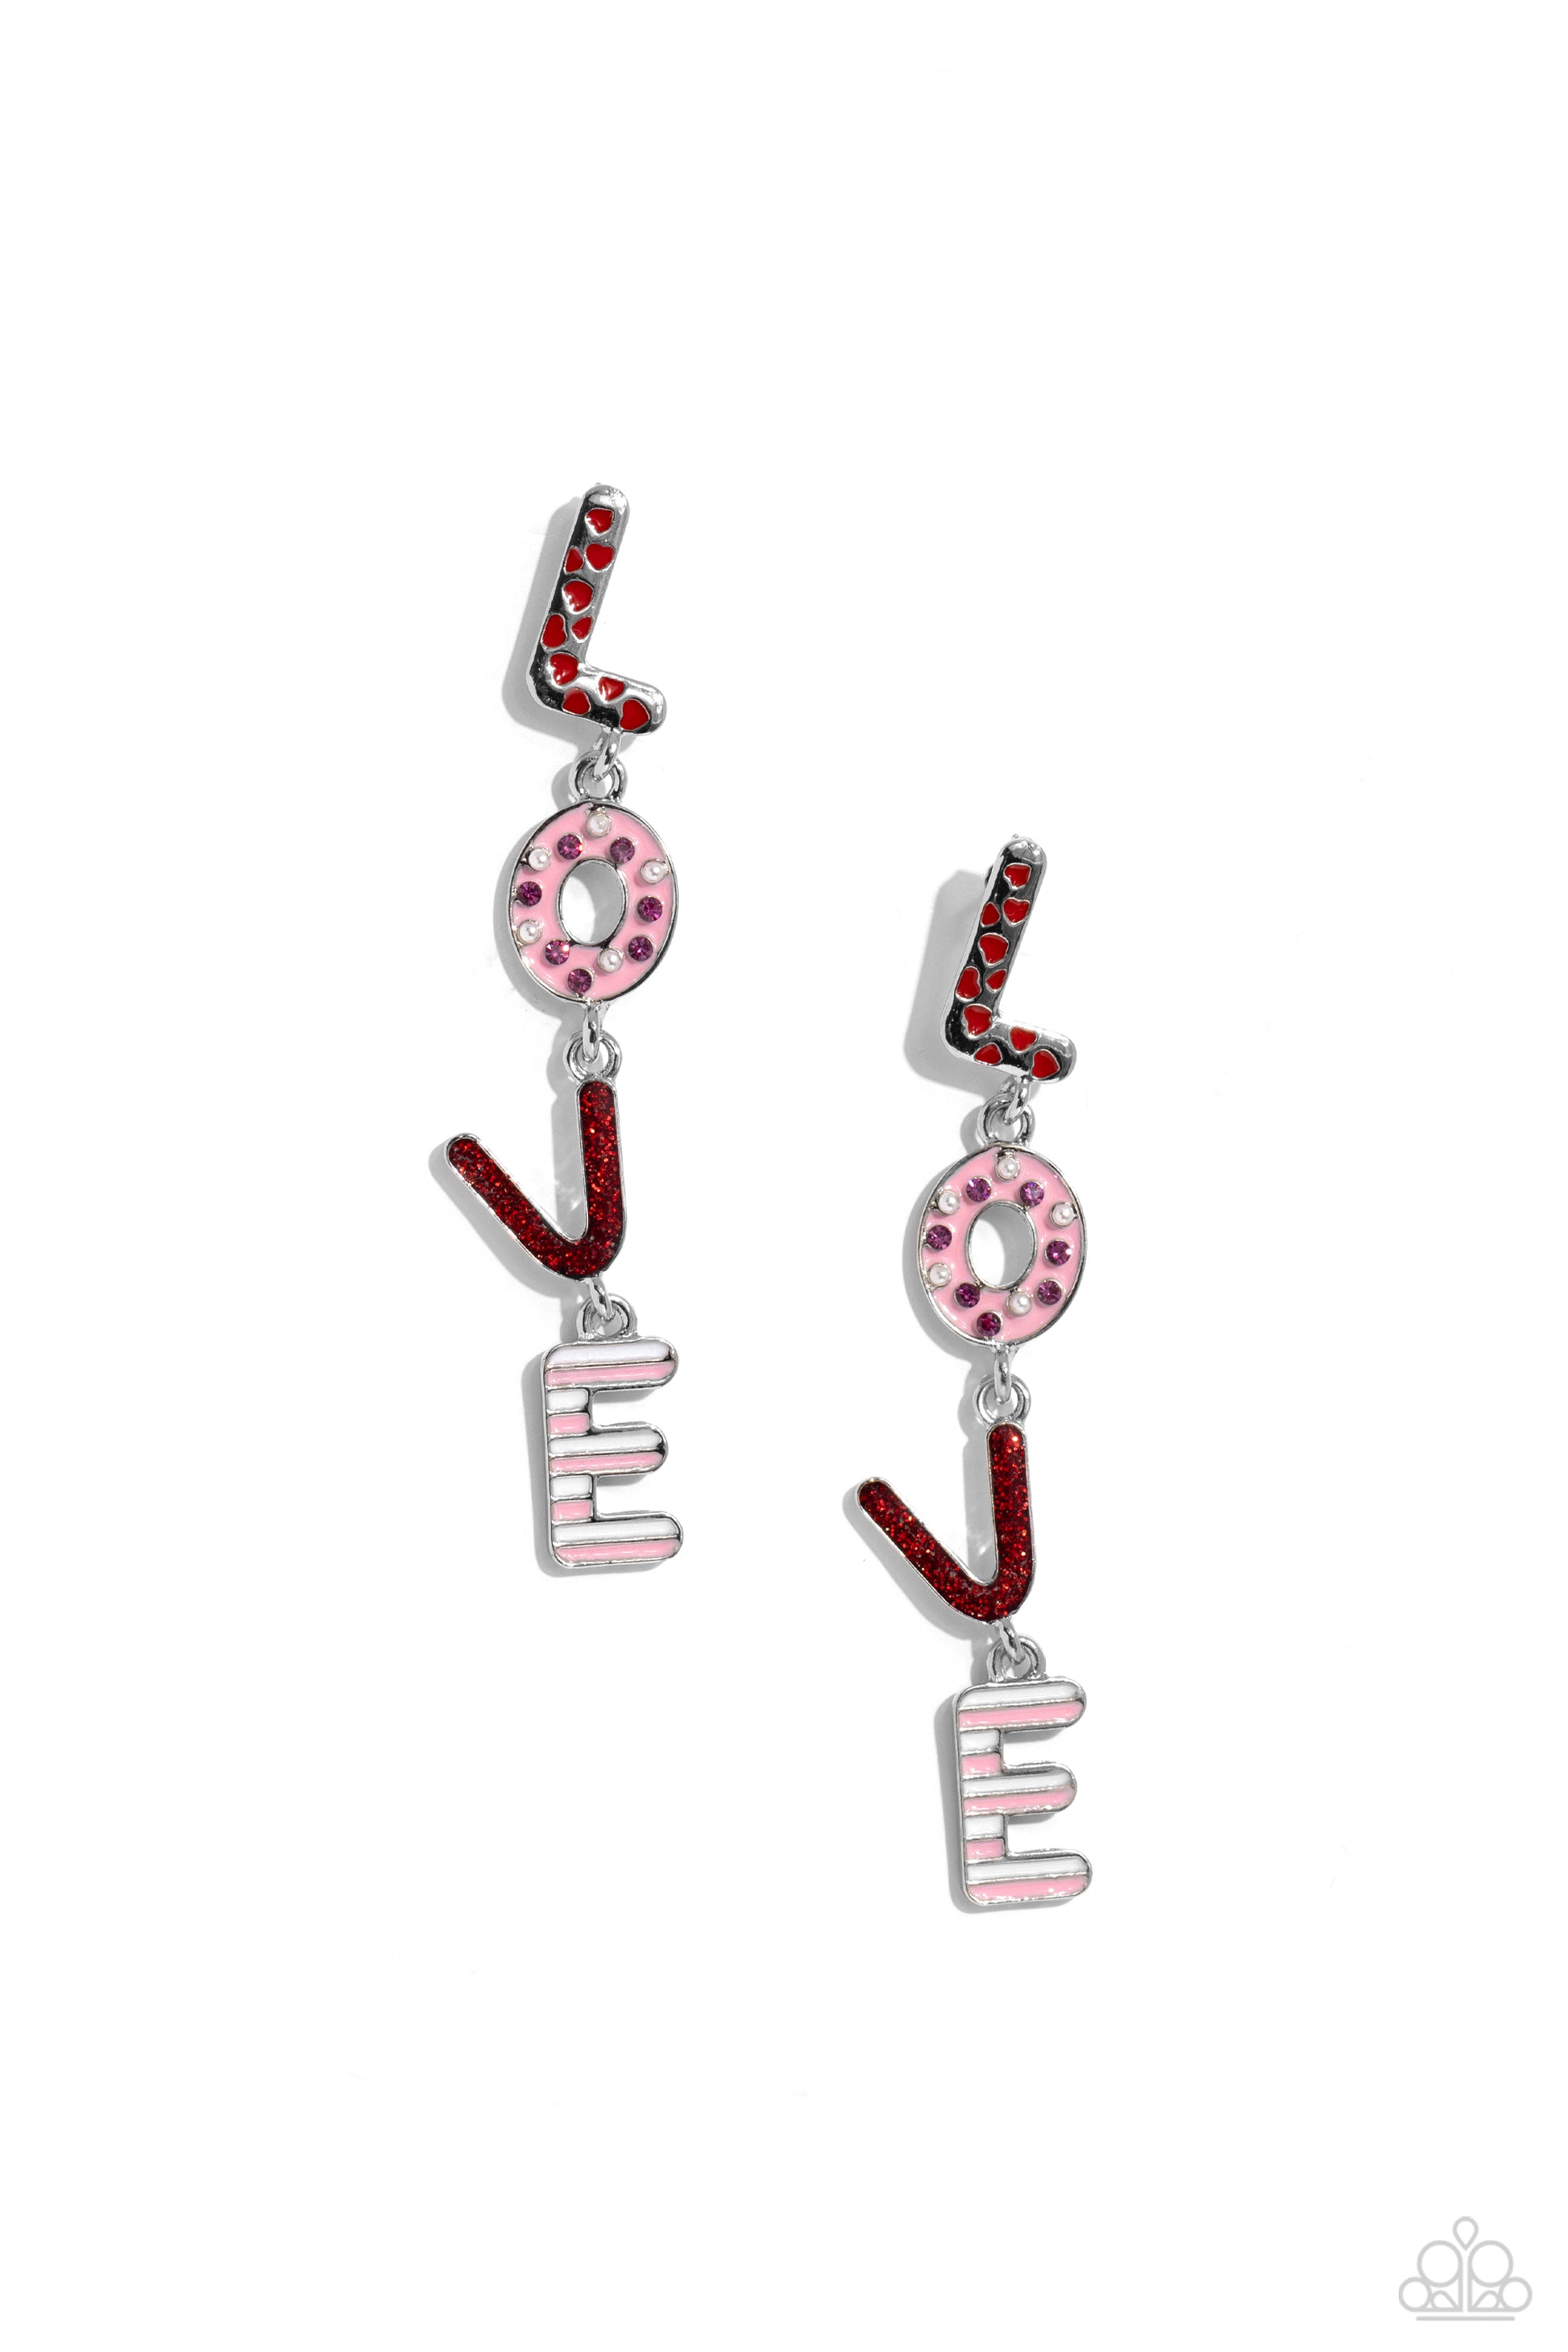 Admirable Assortment - red - Paparazzi earrings